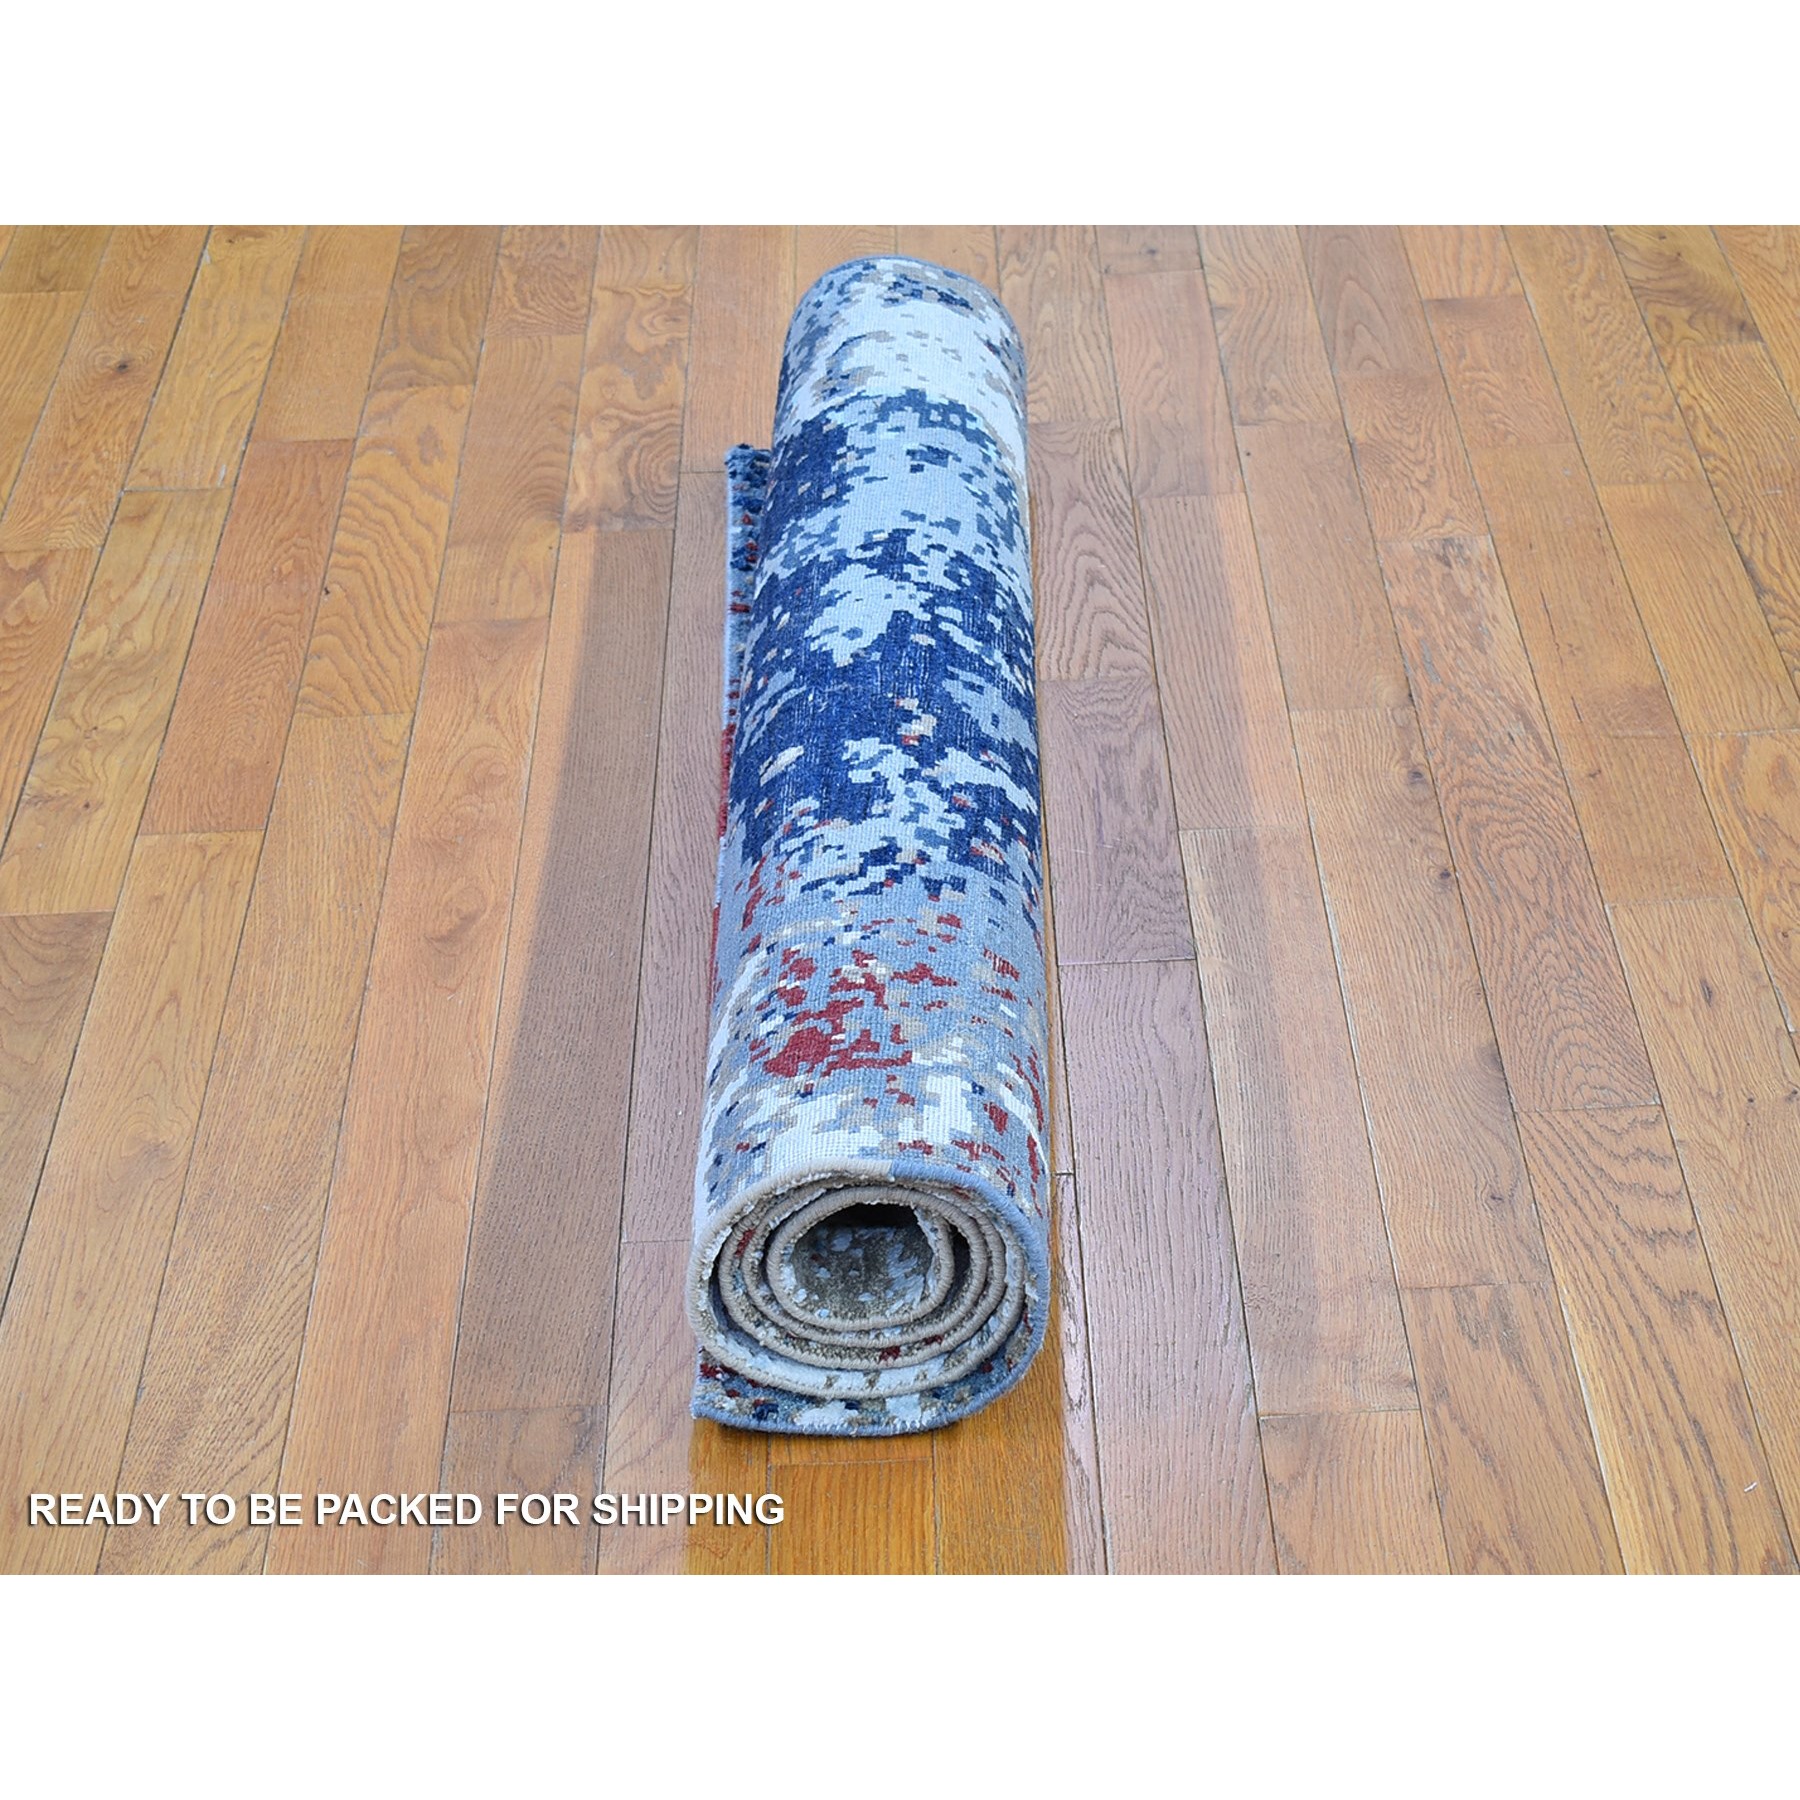 4'1"x6'1" Navy Blue Hi-Low Pile Denser Weave Hand Woven Abstract with Galaxy Design Wool and Silk Oriental Rug 